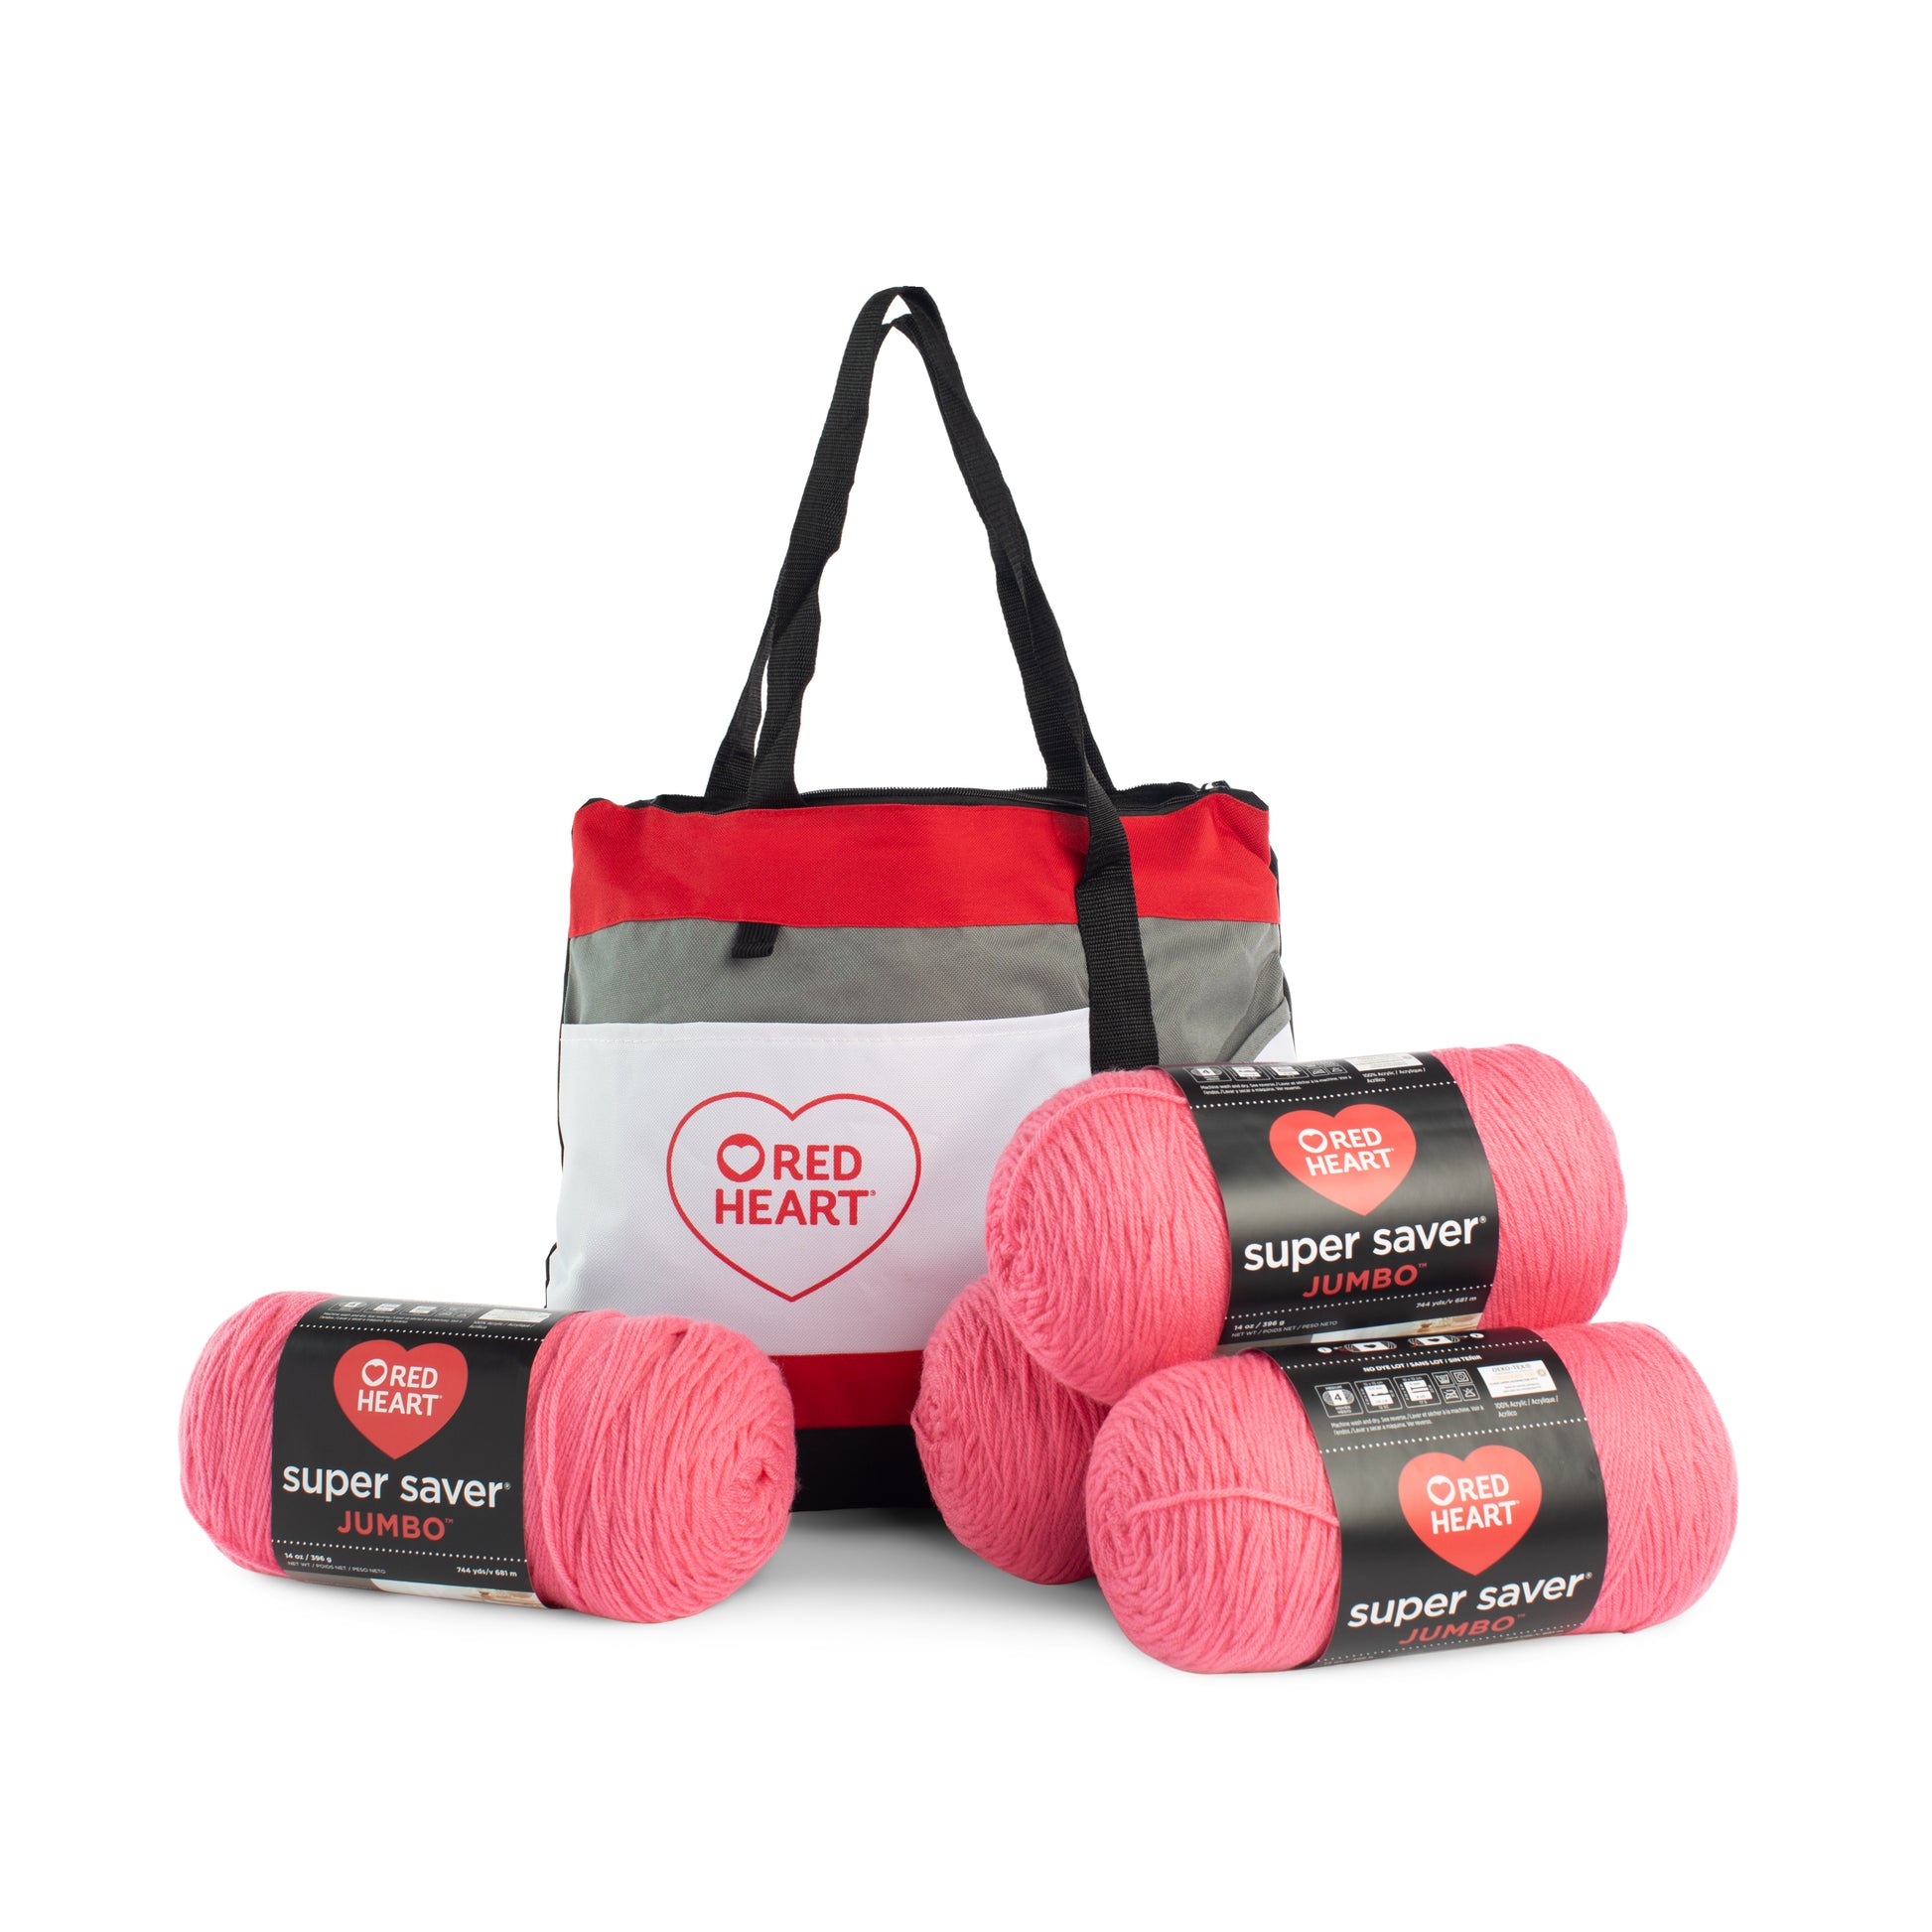 Red Heart Super Saver Jumbo Value Pack with Tote bag Perfect Pink